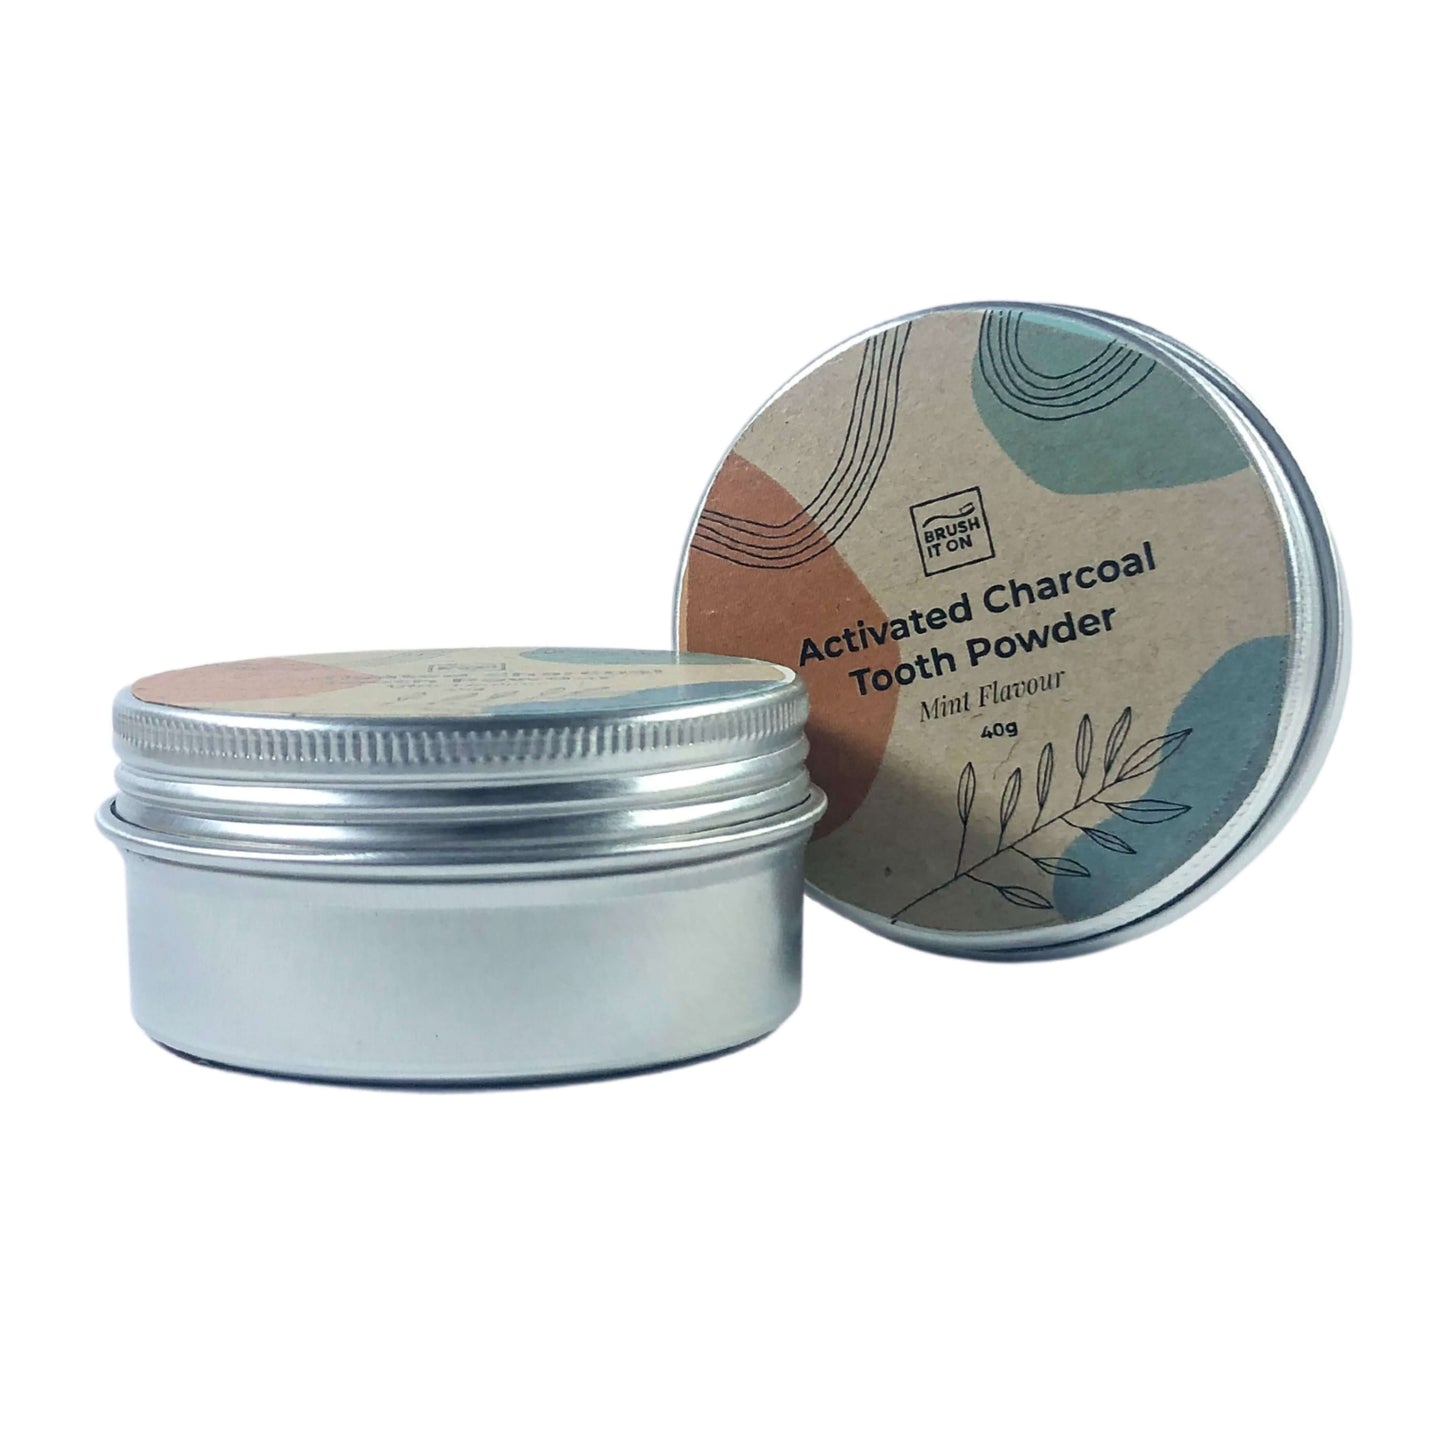 Brush It On Activated Charcoal Tooth Powder - mint flavour in a reusable tin